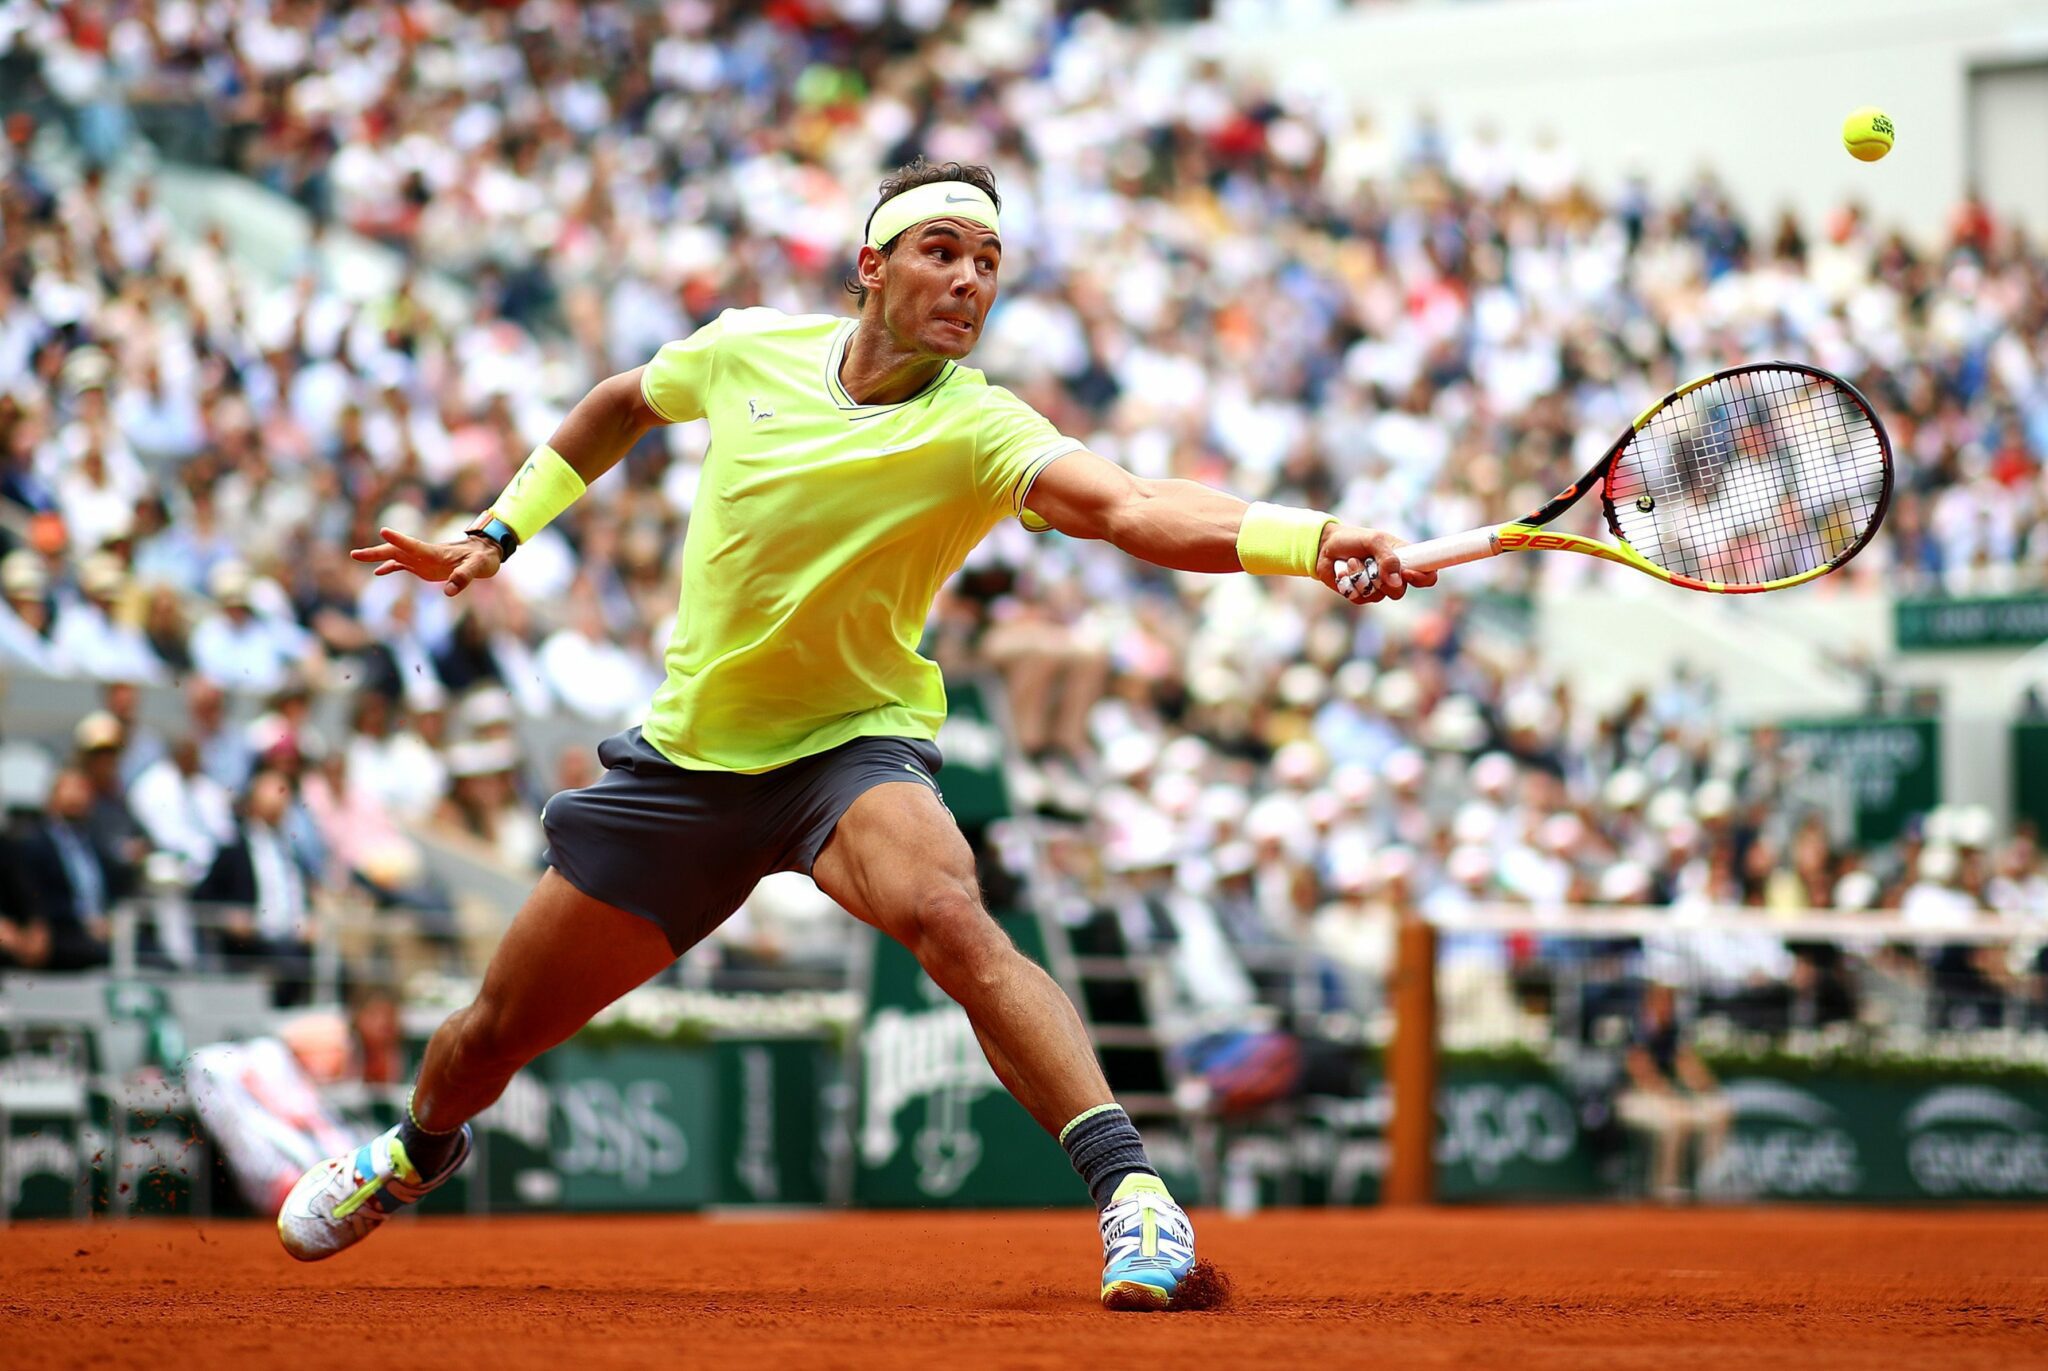 Image of Nadal playing tennis at the French Open